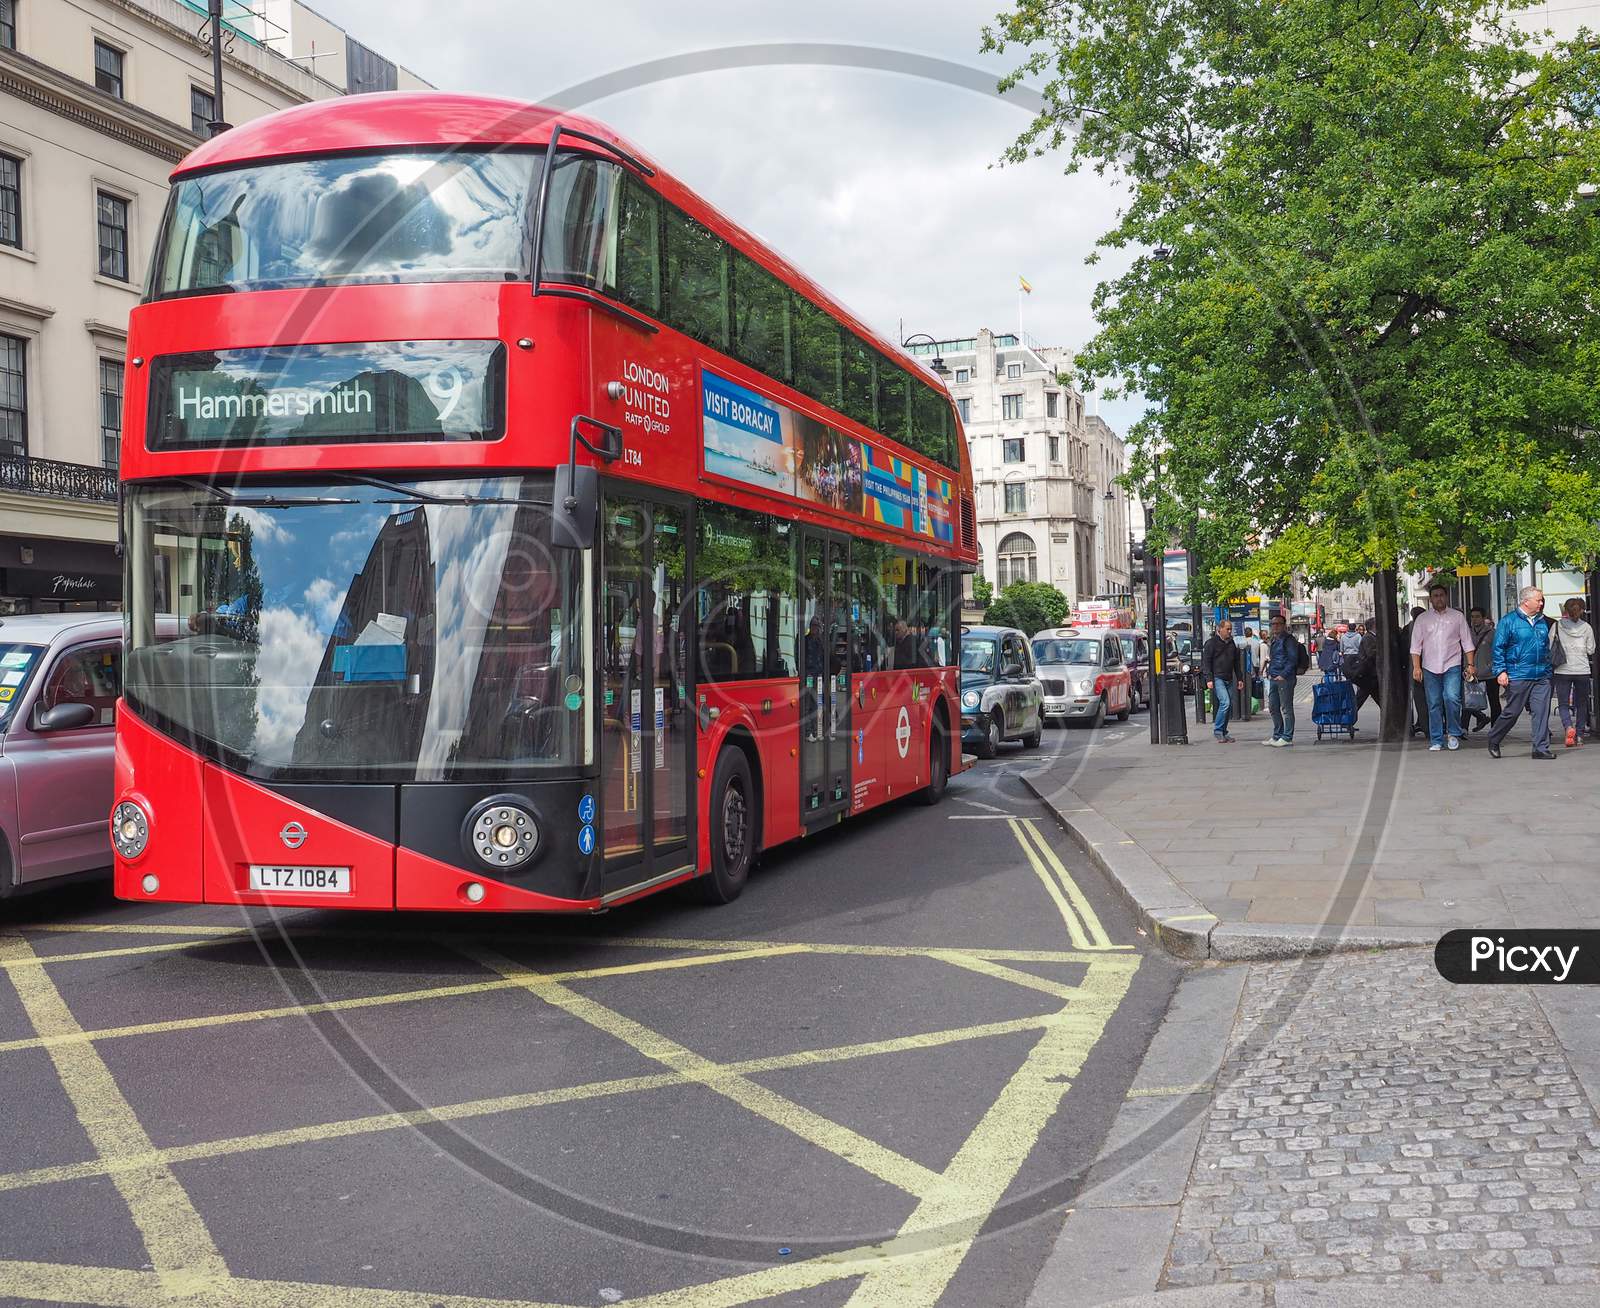 London, Uk - June 09, 2015: Red Double Decker Buses Are A Traditional Landmark Of London